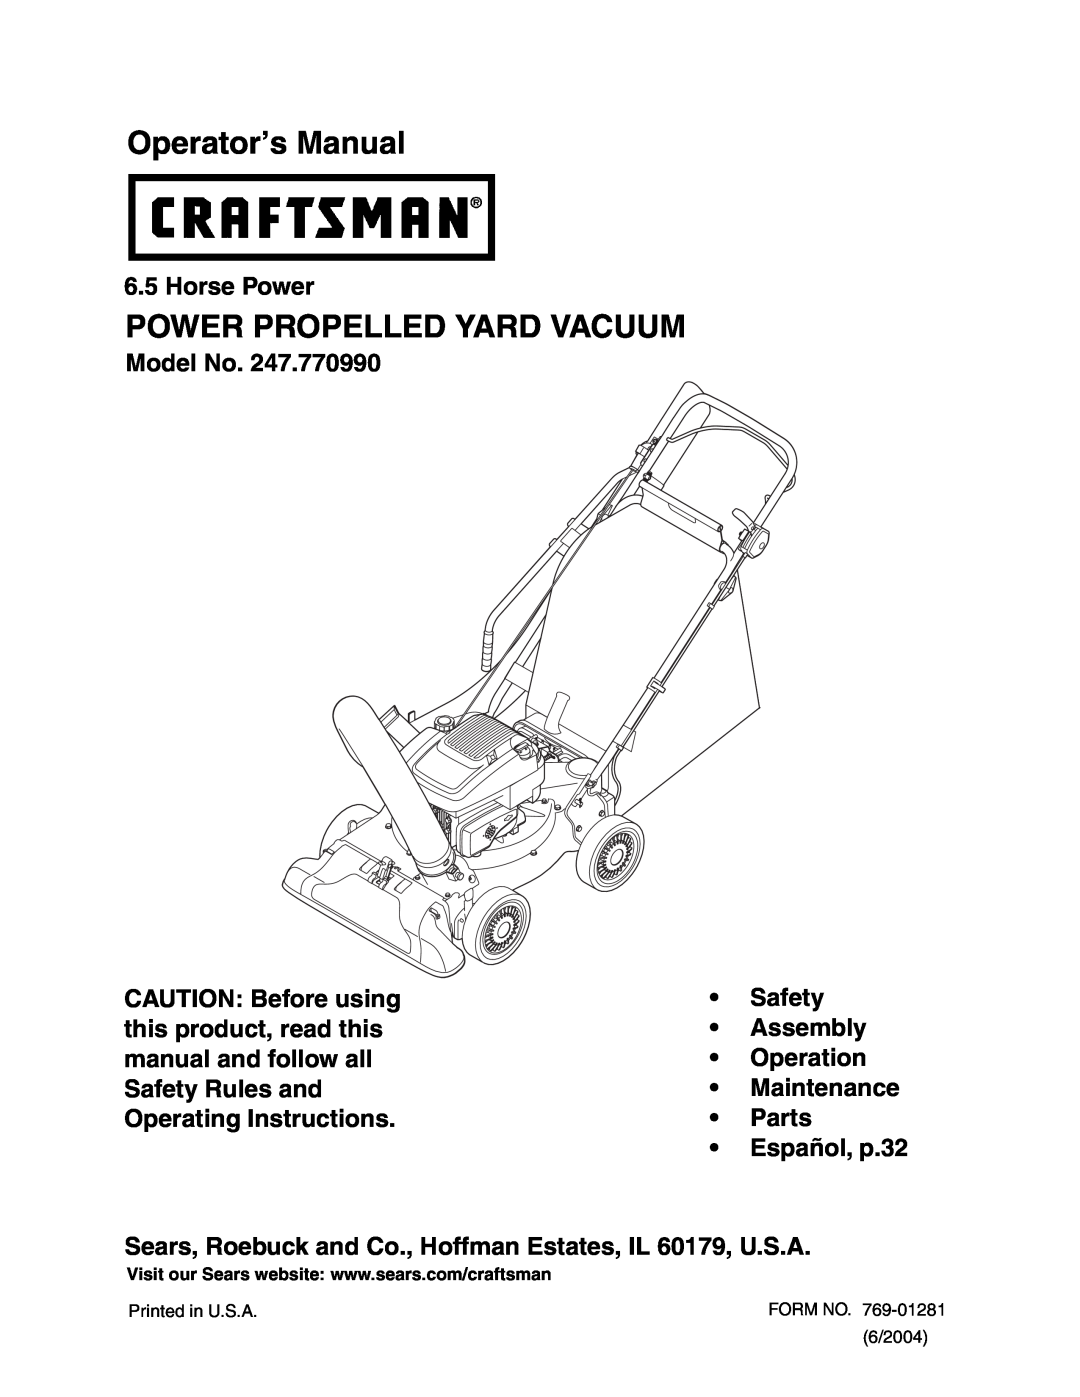 Craftsman 247.77099 operating instructions Horse Power, Model No, •Safety •Assembly •Operation •Maintenance •Parts 